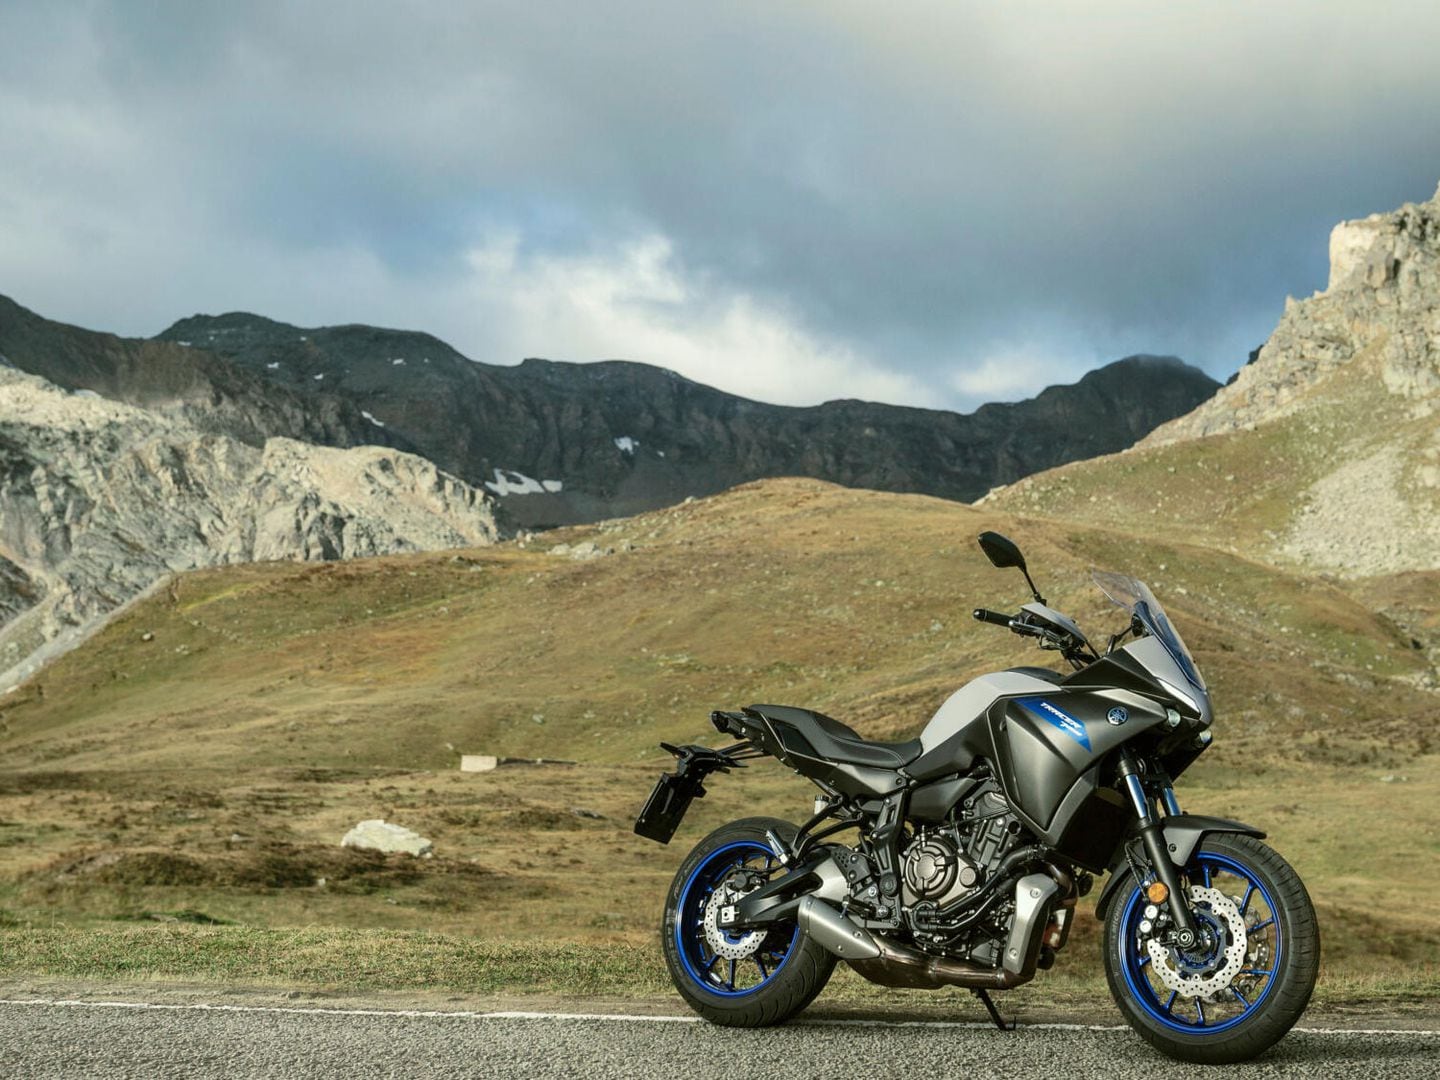 Yamaha Tracer 700 Updated For 2020